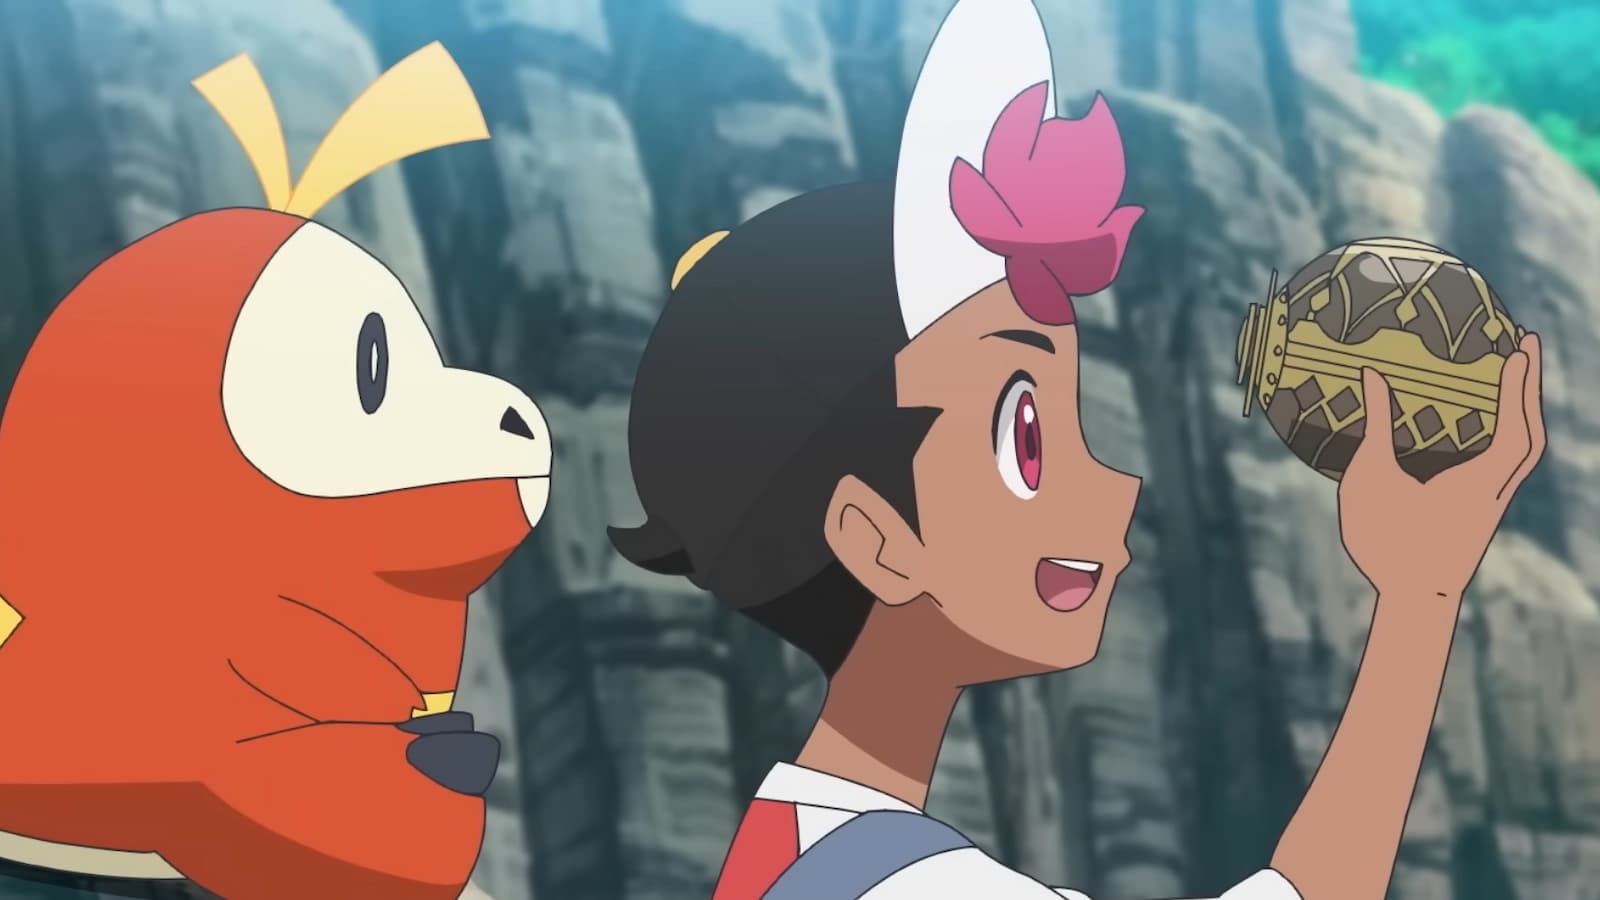 When is Pokemon Horizons episode 11 out? Release date & trailer